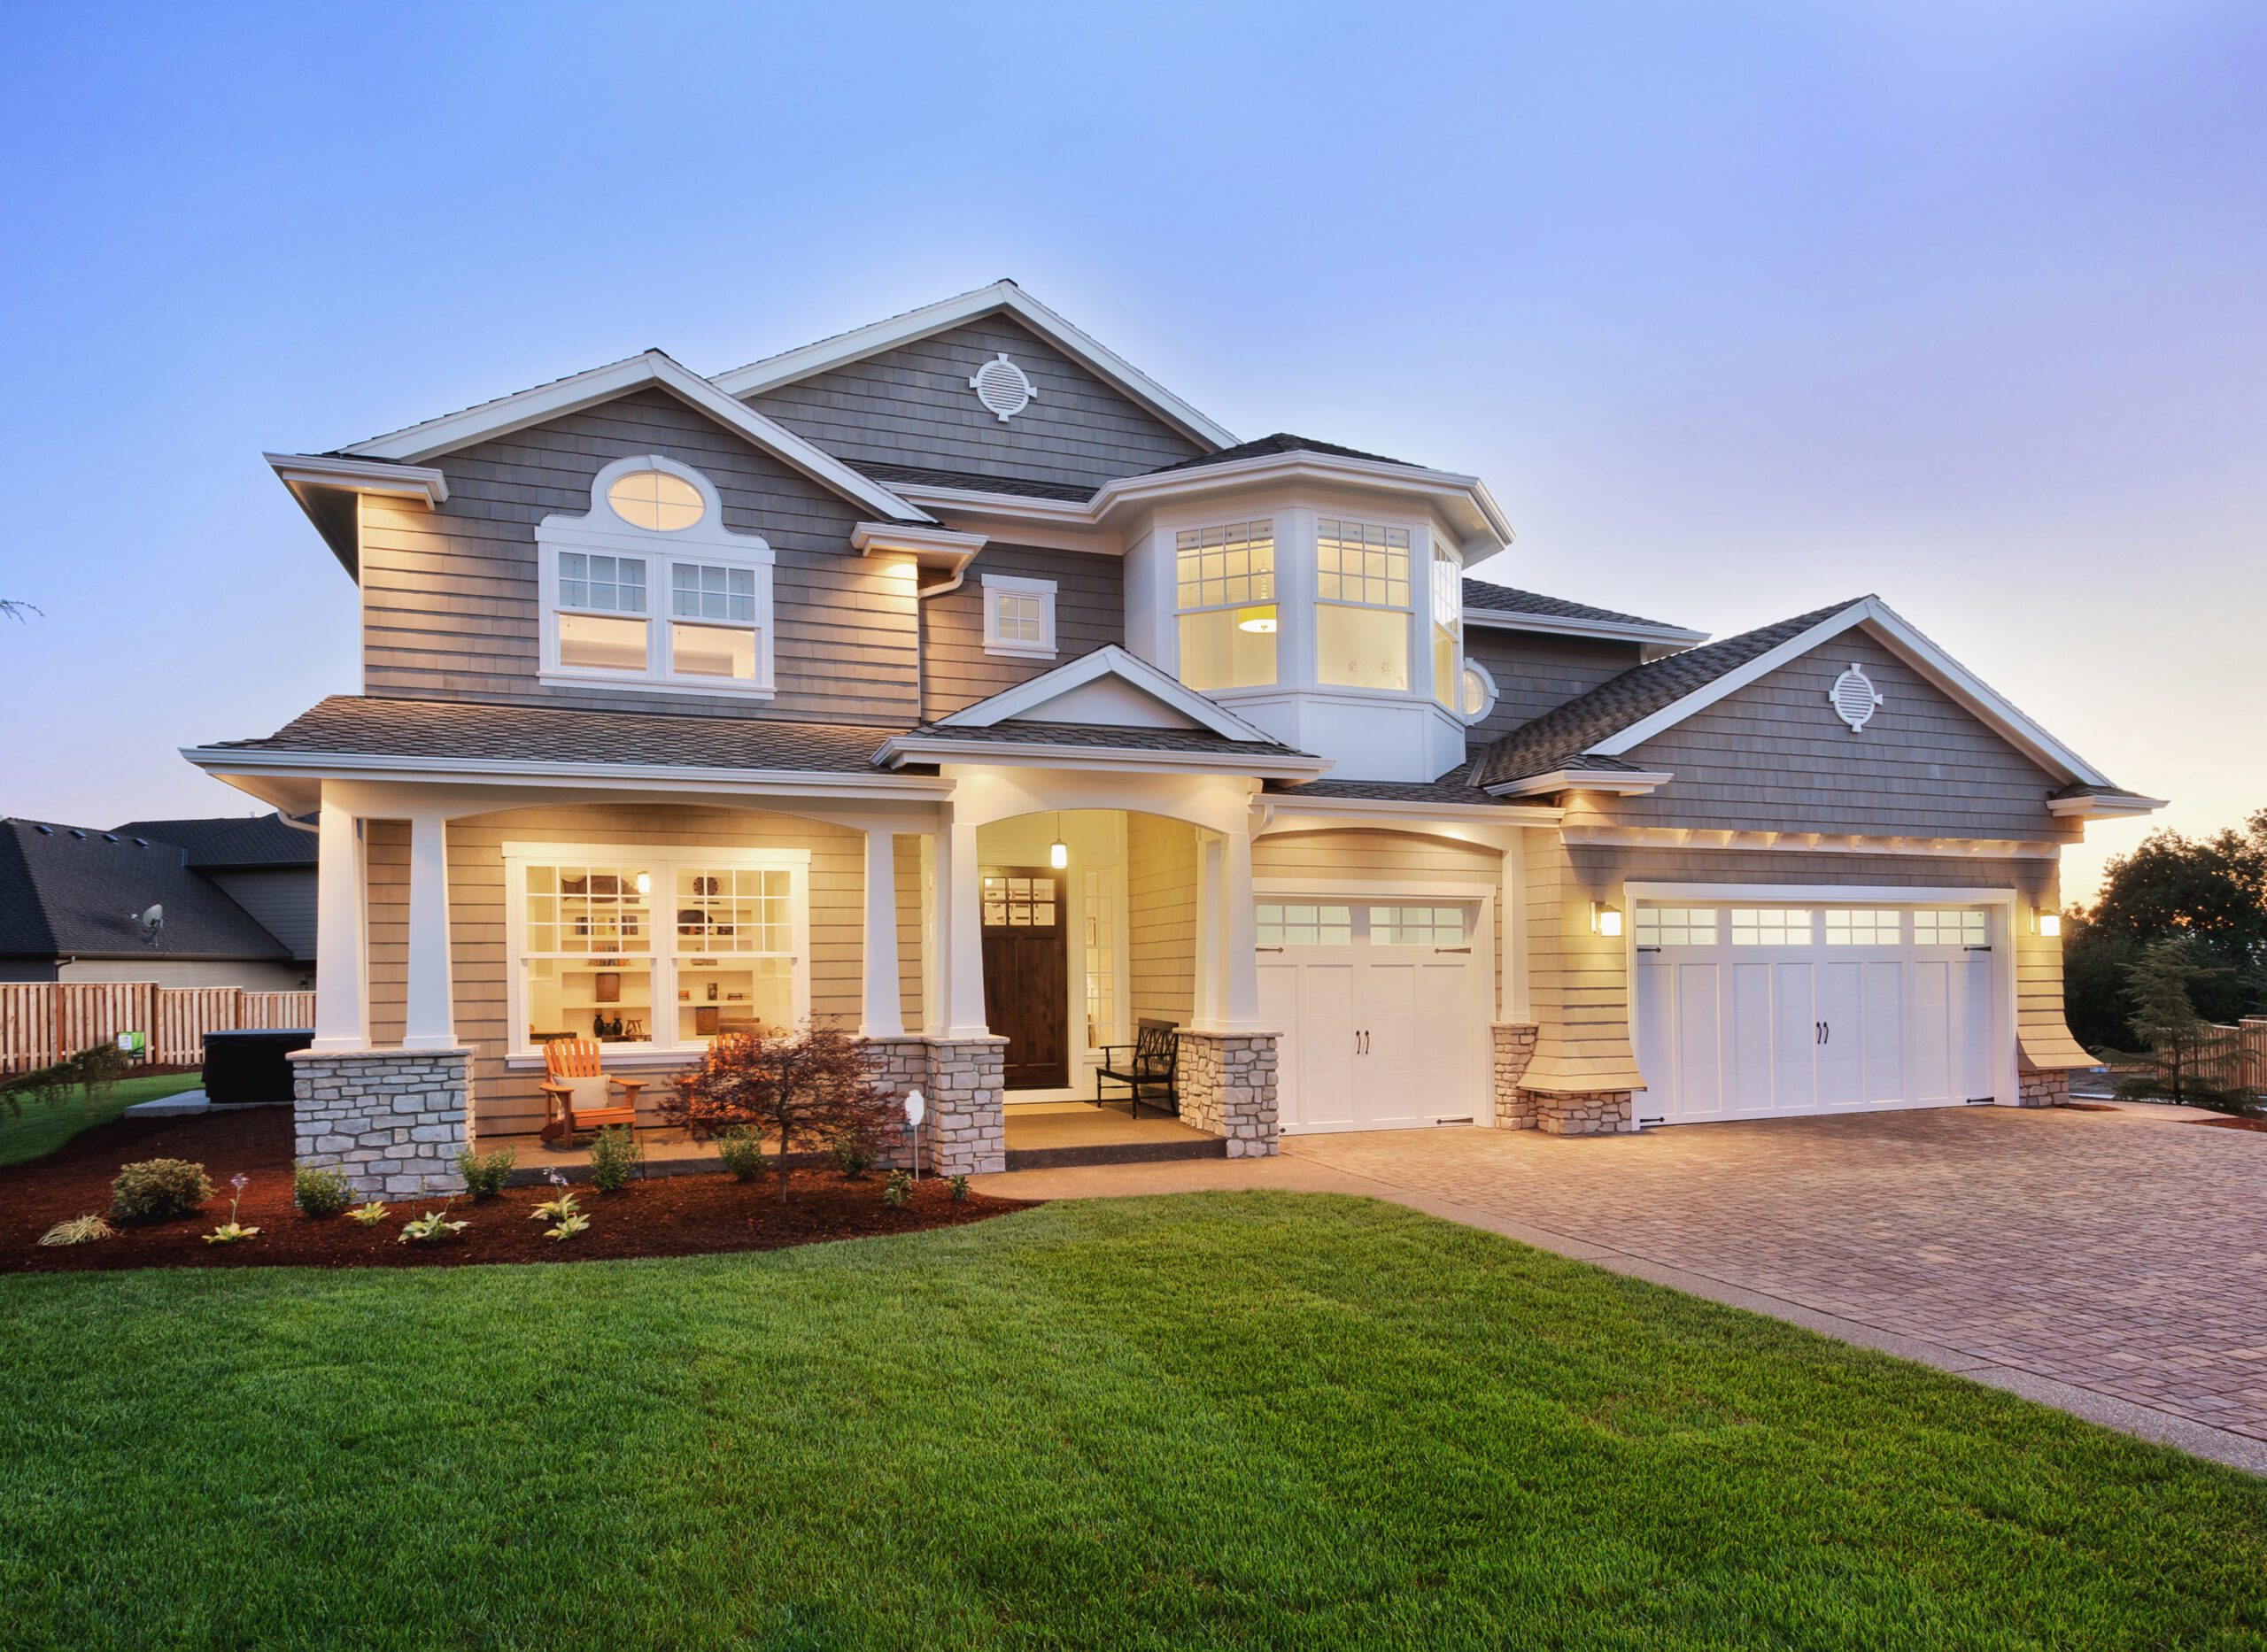 Financing your home improvement project